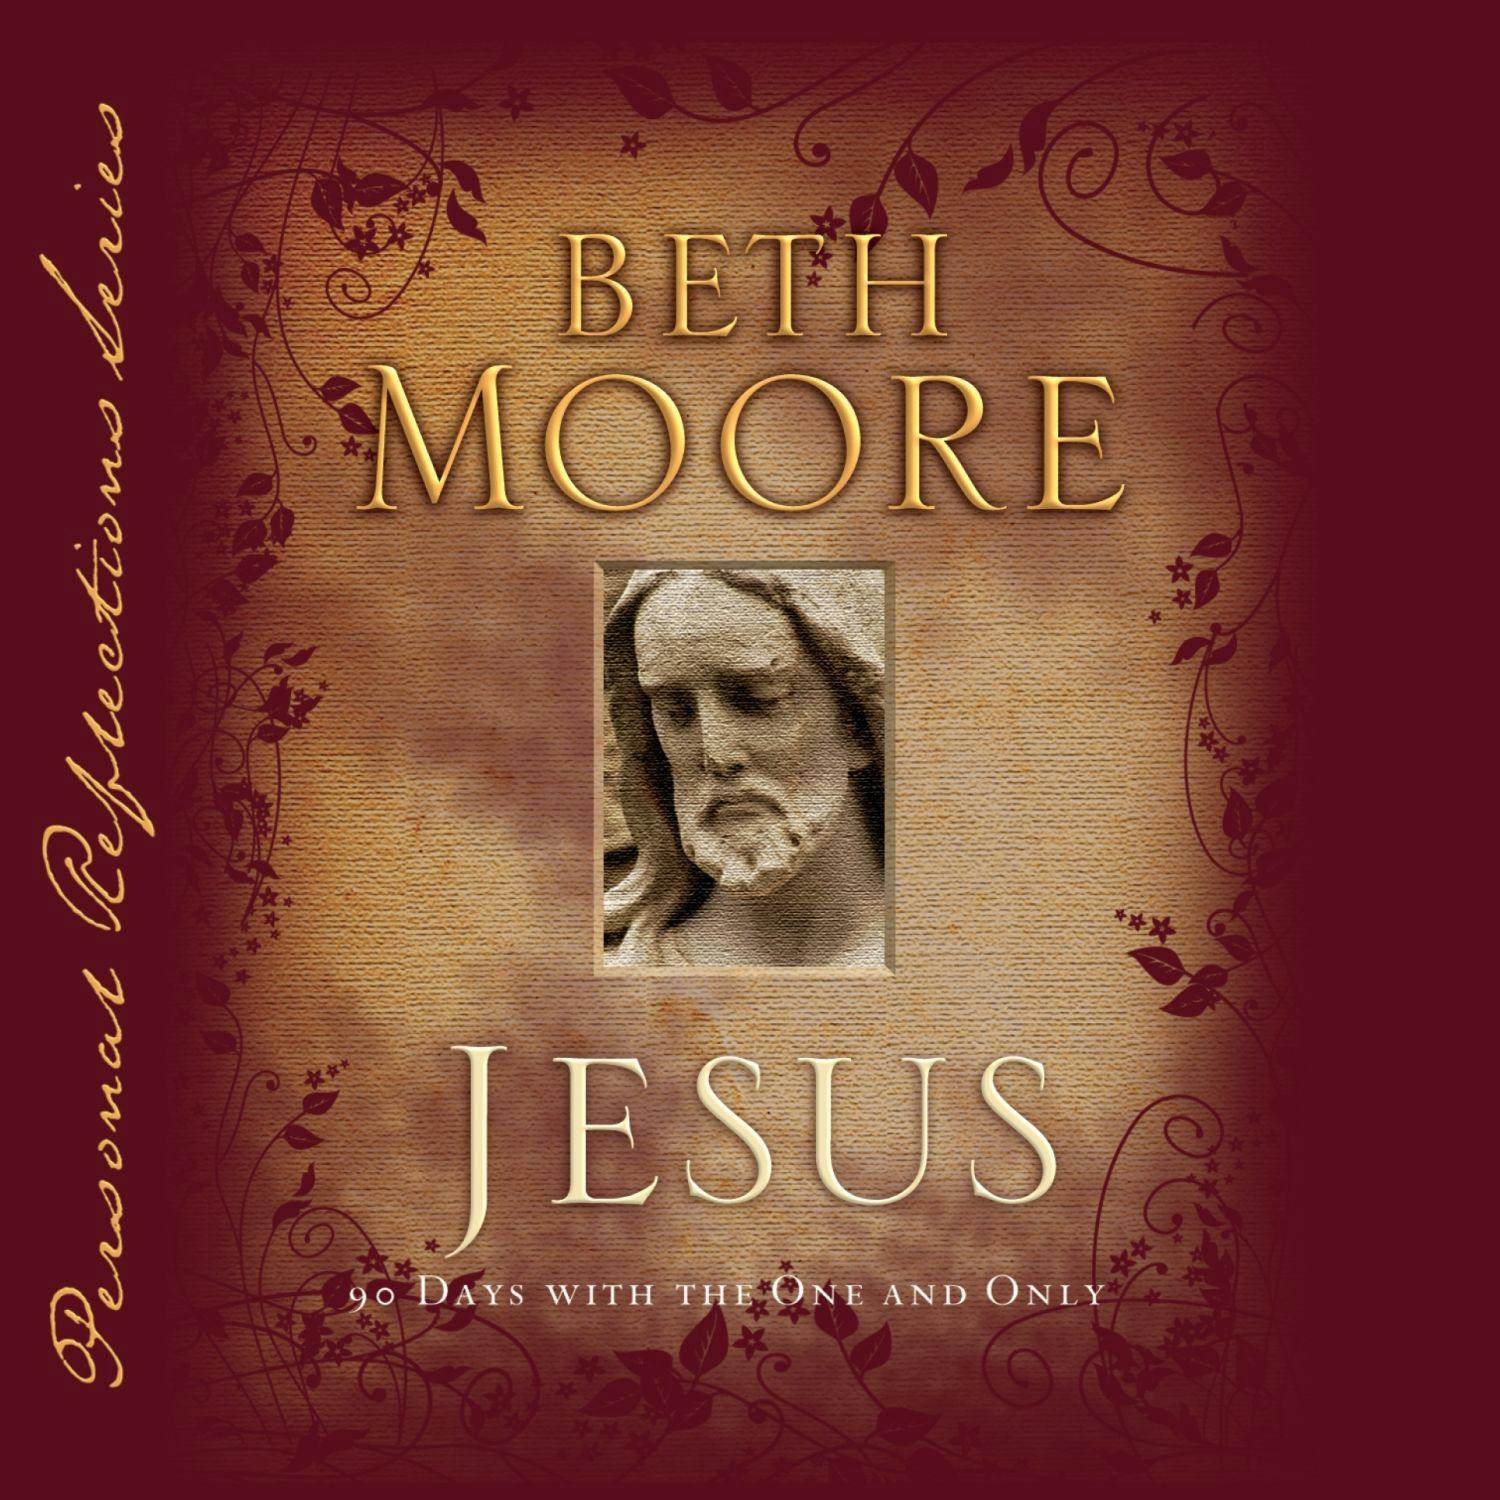 Jesus: 90 Days With the One and Only: Personal Reflections - Beth Moore